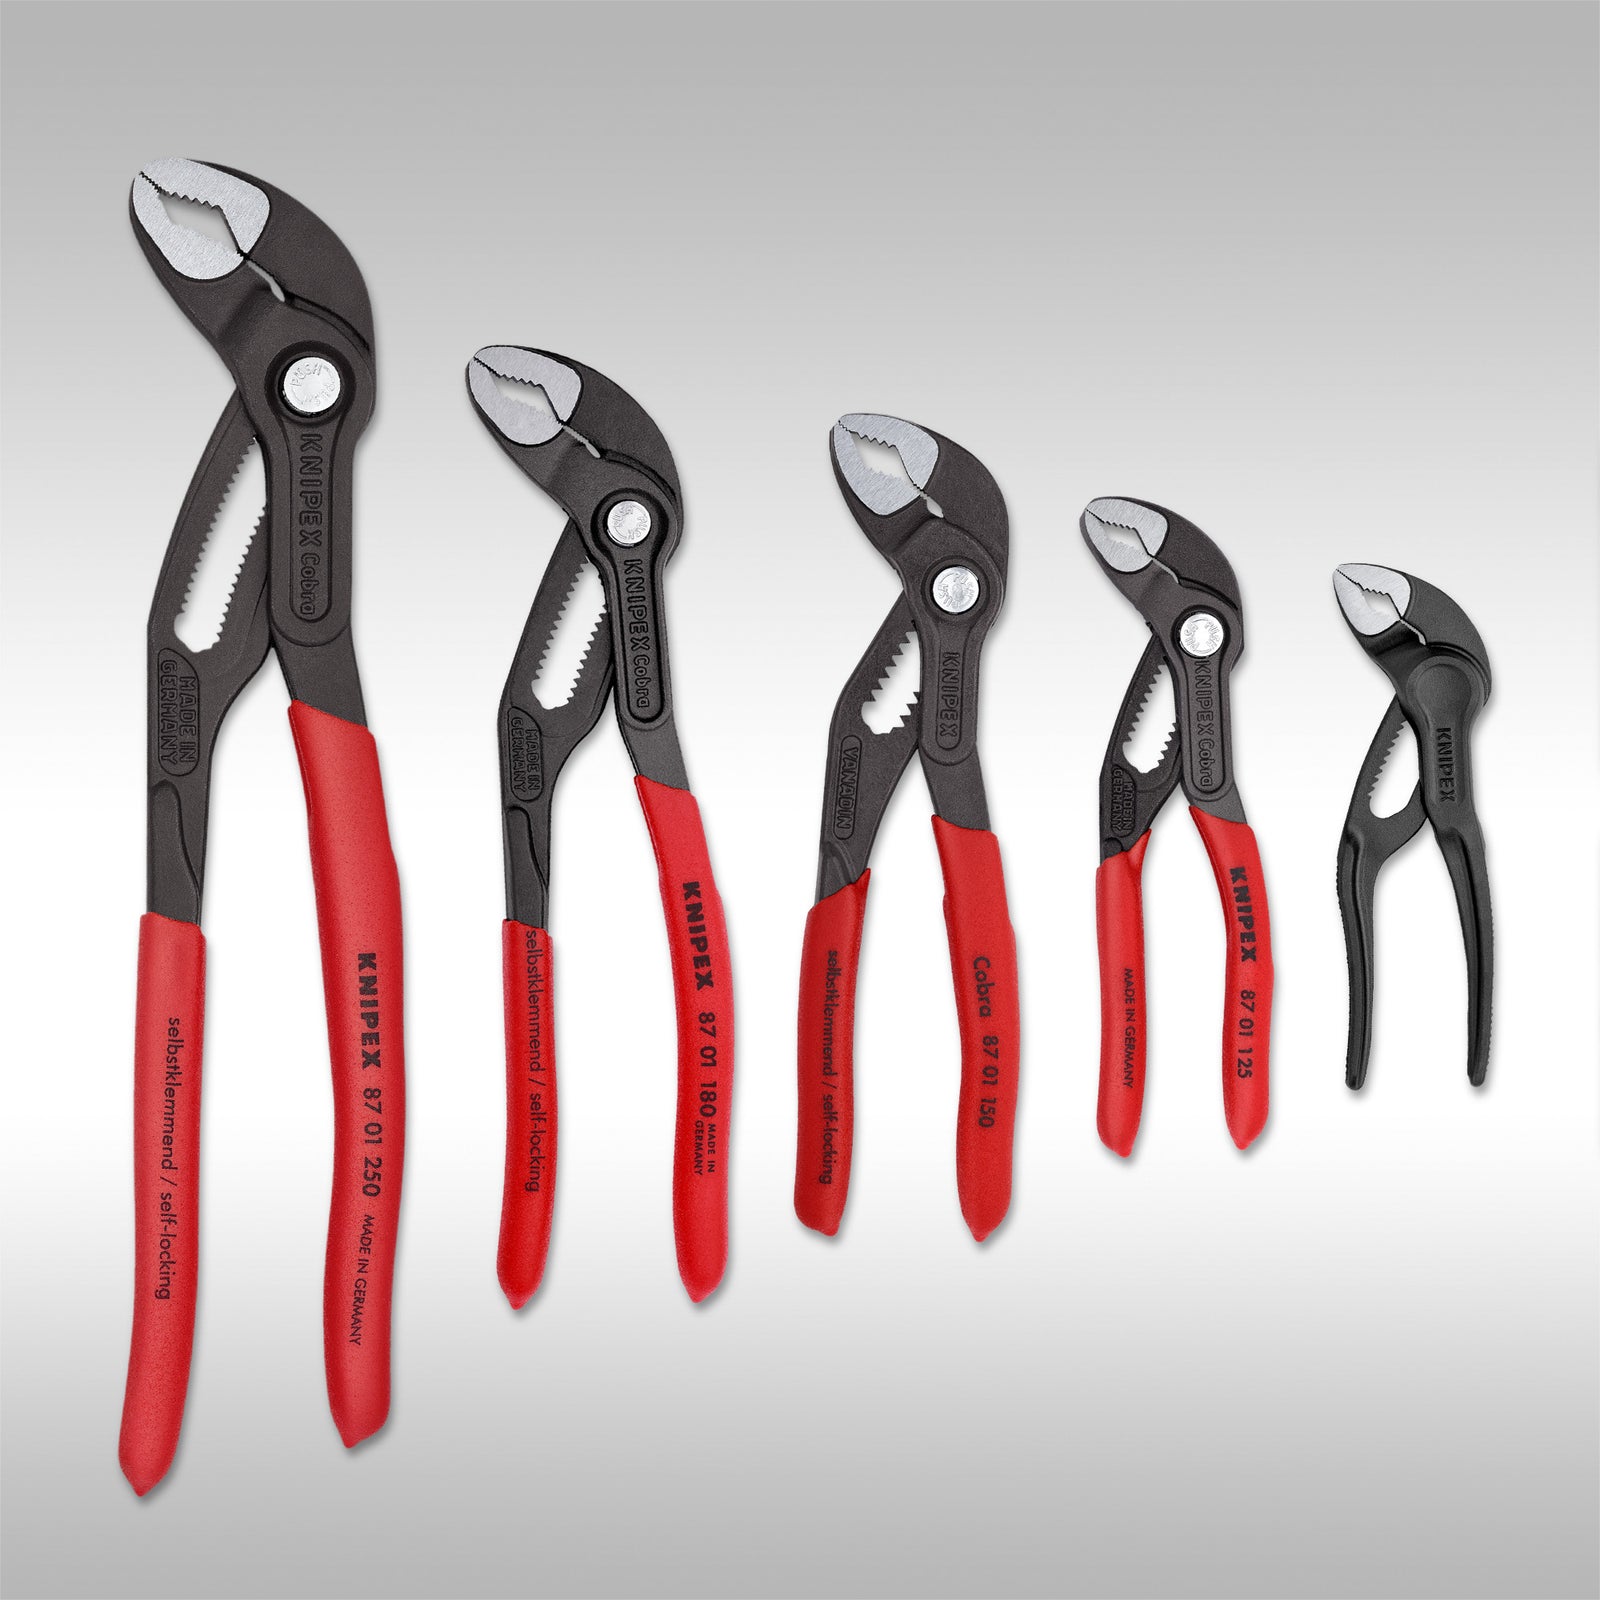 KNIPEX - 2 PIECE MINI PLIERS IN BELT POUCH - 6 PLIERS WRENCH & 5 COB -  Upshift Online Inc.